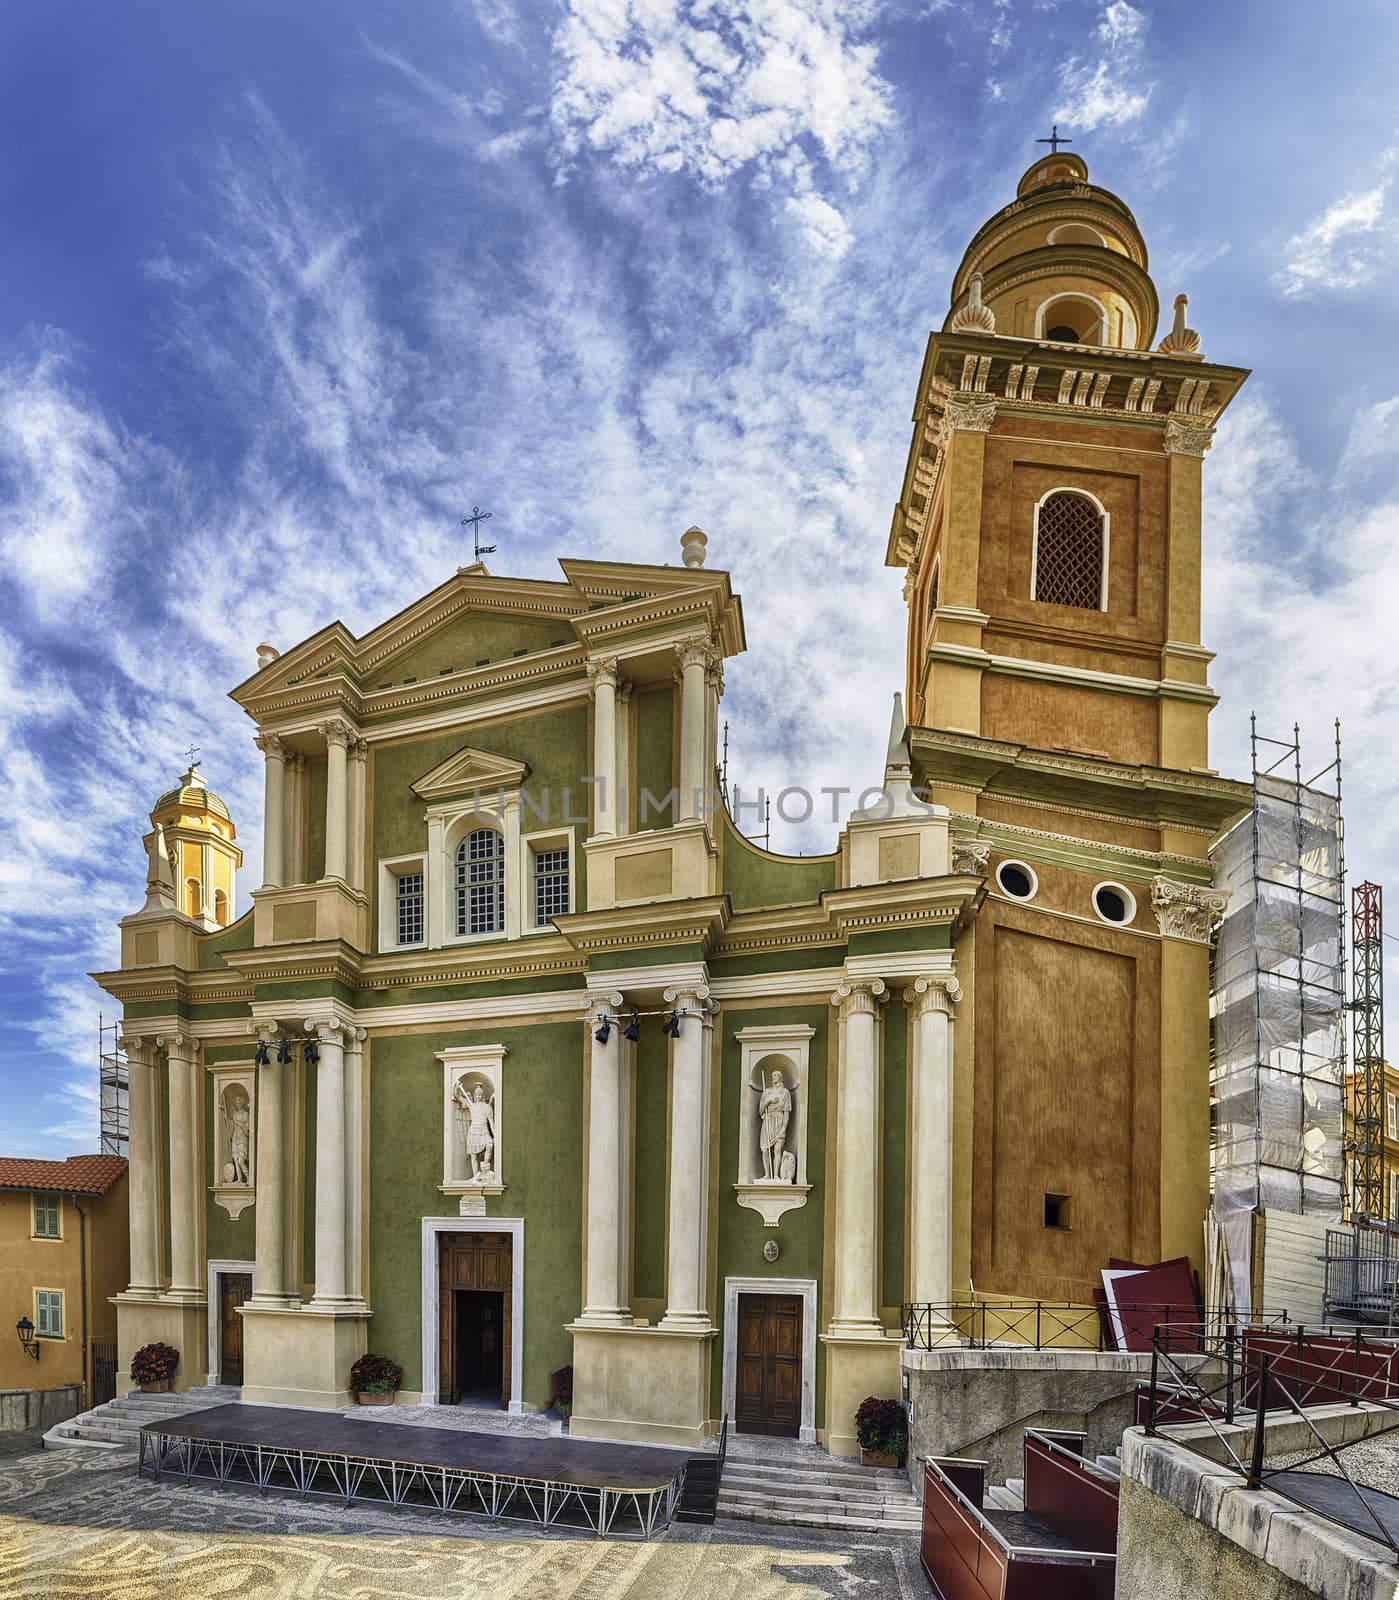 Facade and architecture of the Basilica Saint-Michel-Archange in the old town of Menton, picturesque city in the Provence-Alpes-Côte d'Azur region on the French Riviera, close to the Italian border